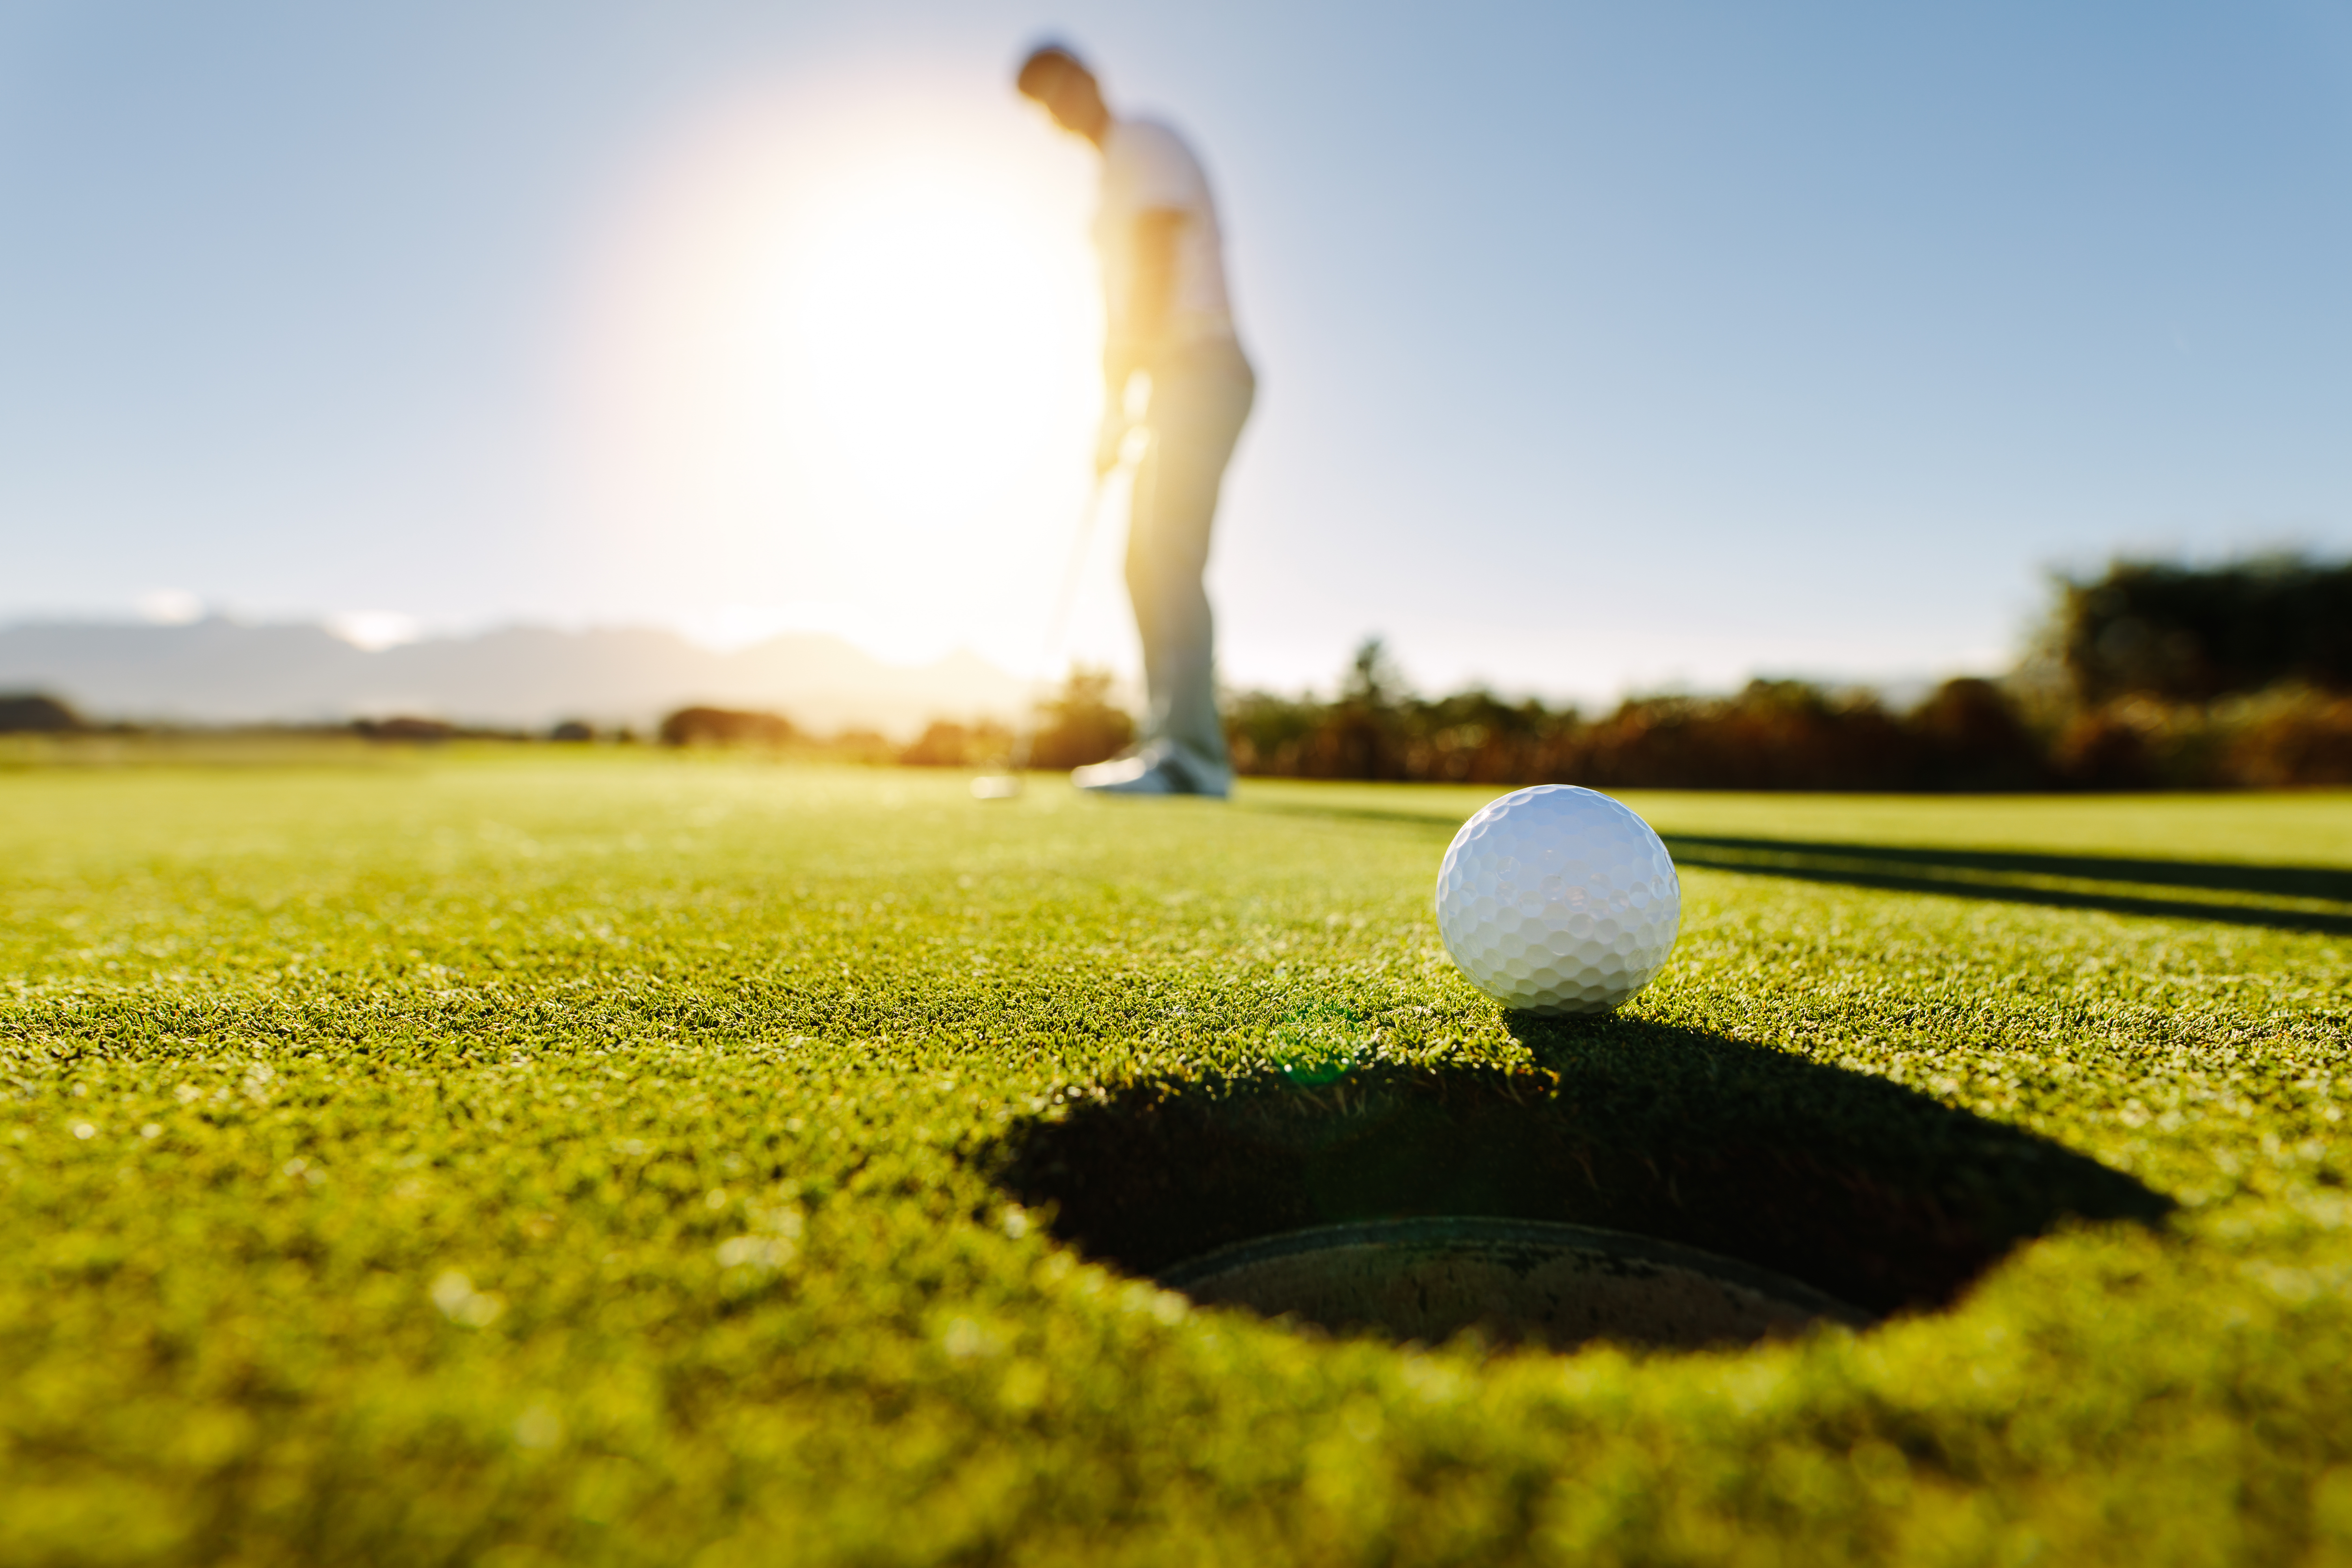 Golfers Needed to Support Agricultural Education